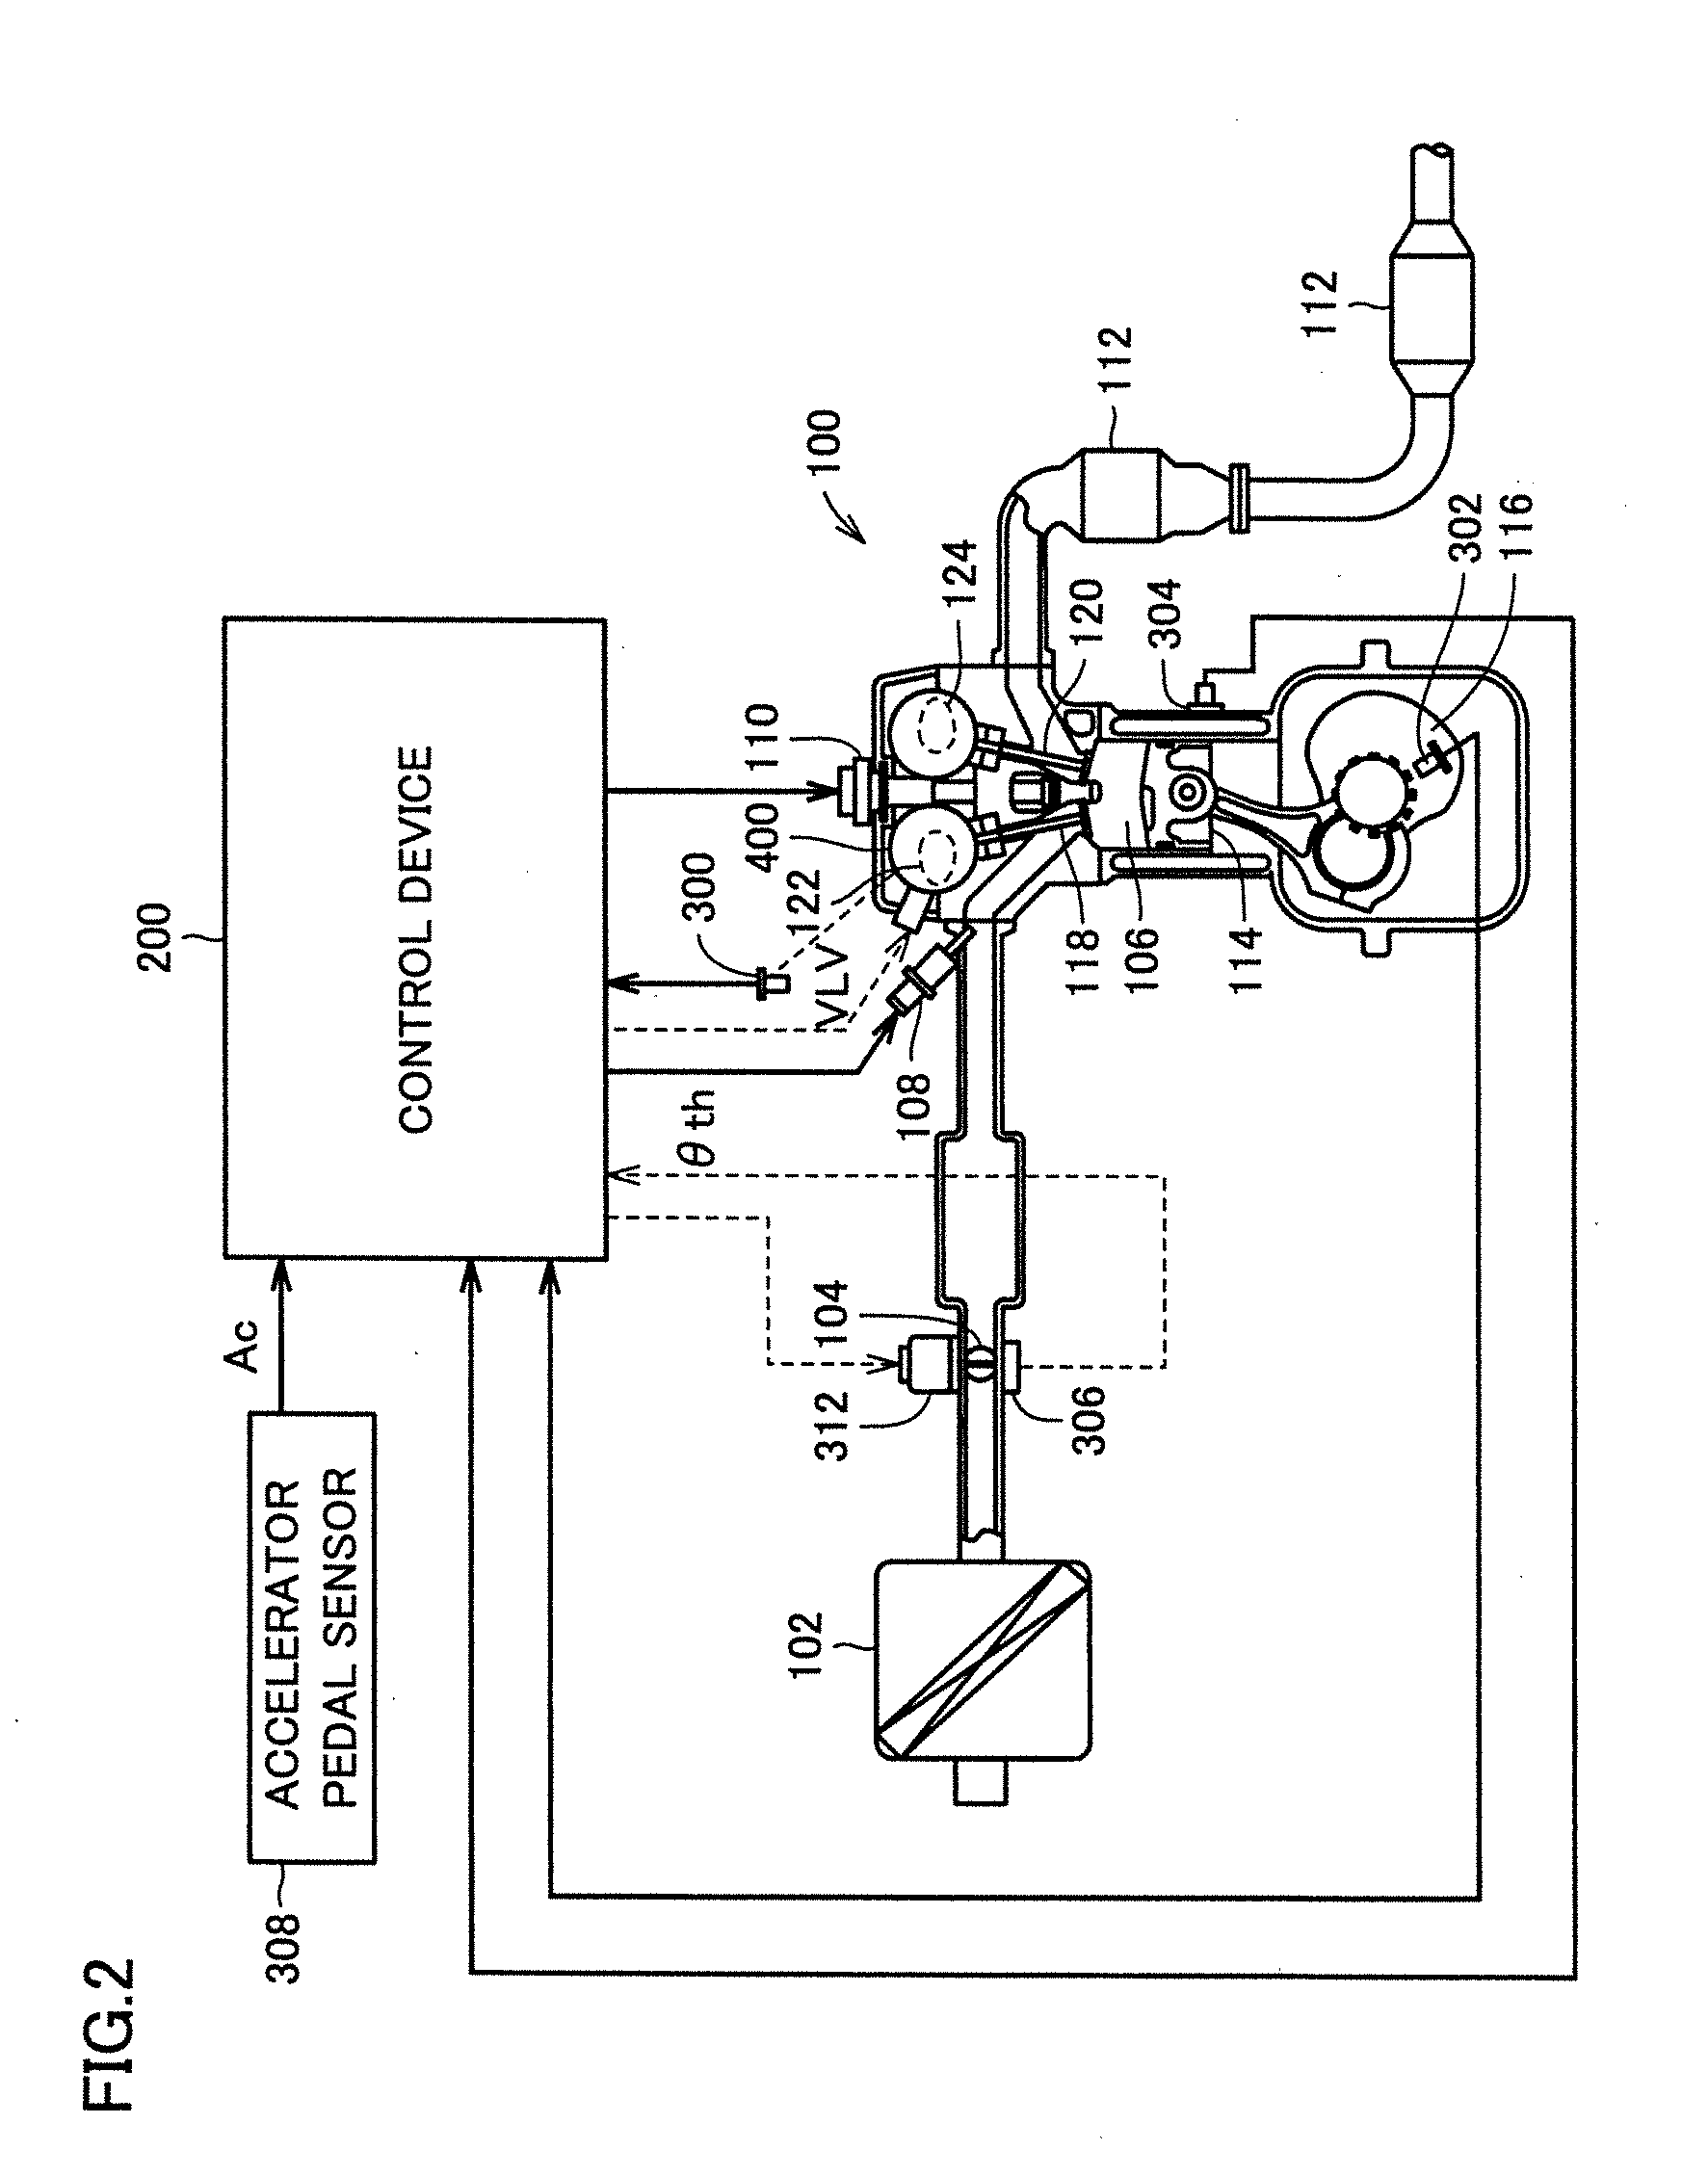 Device and method for controlling a hybrid vehicle